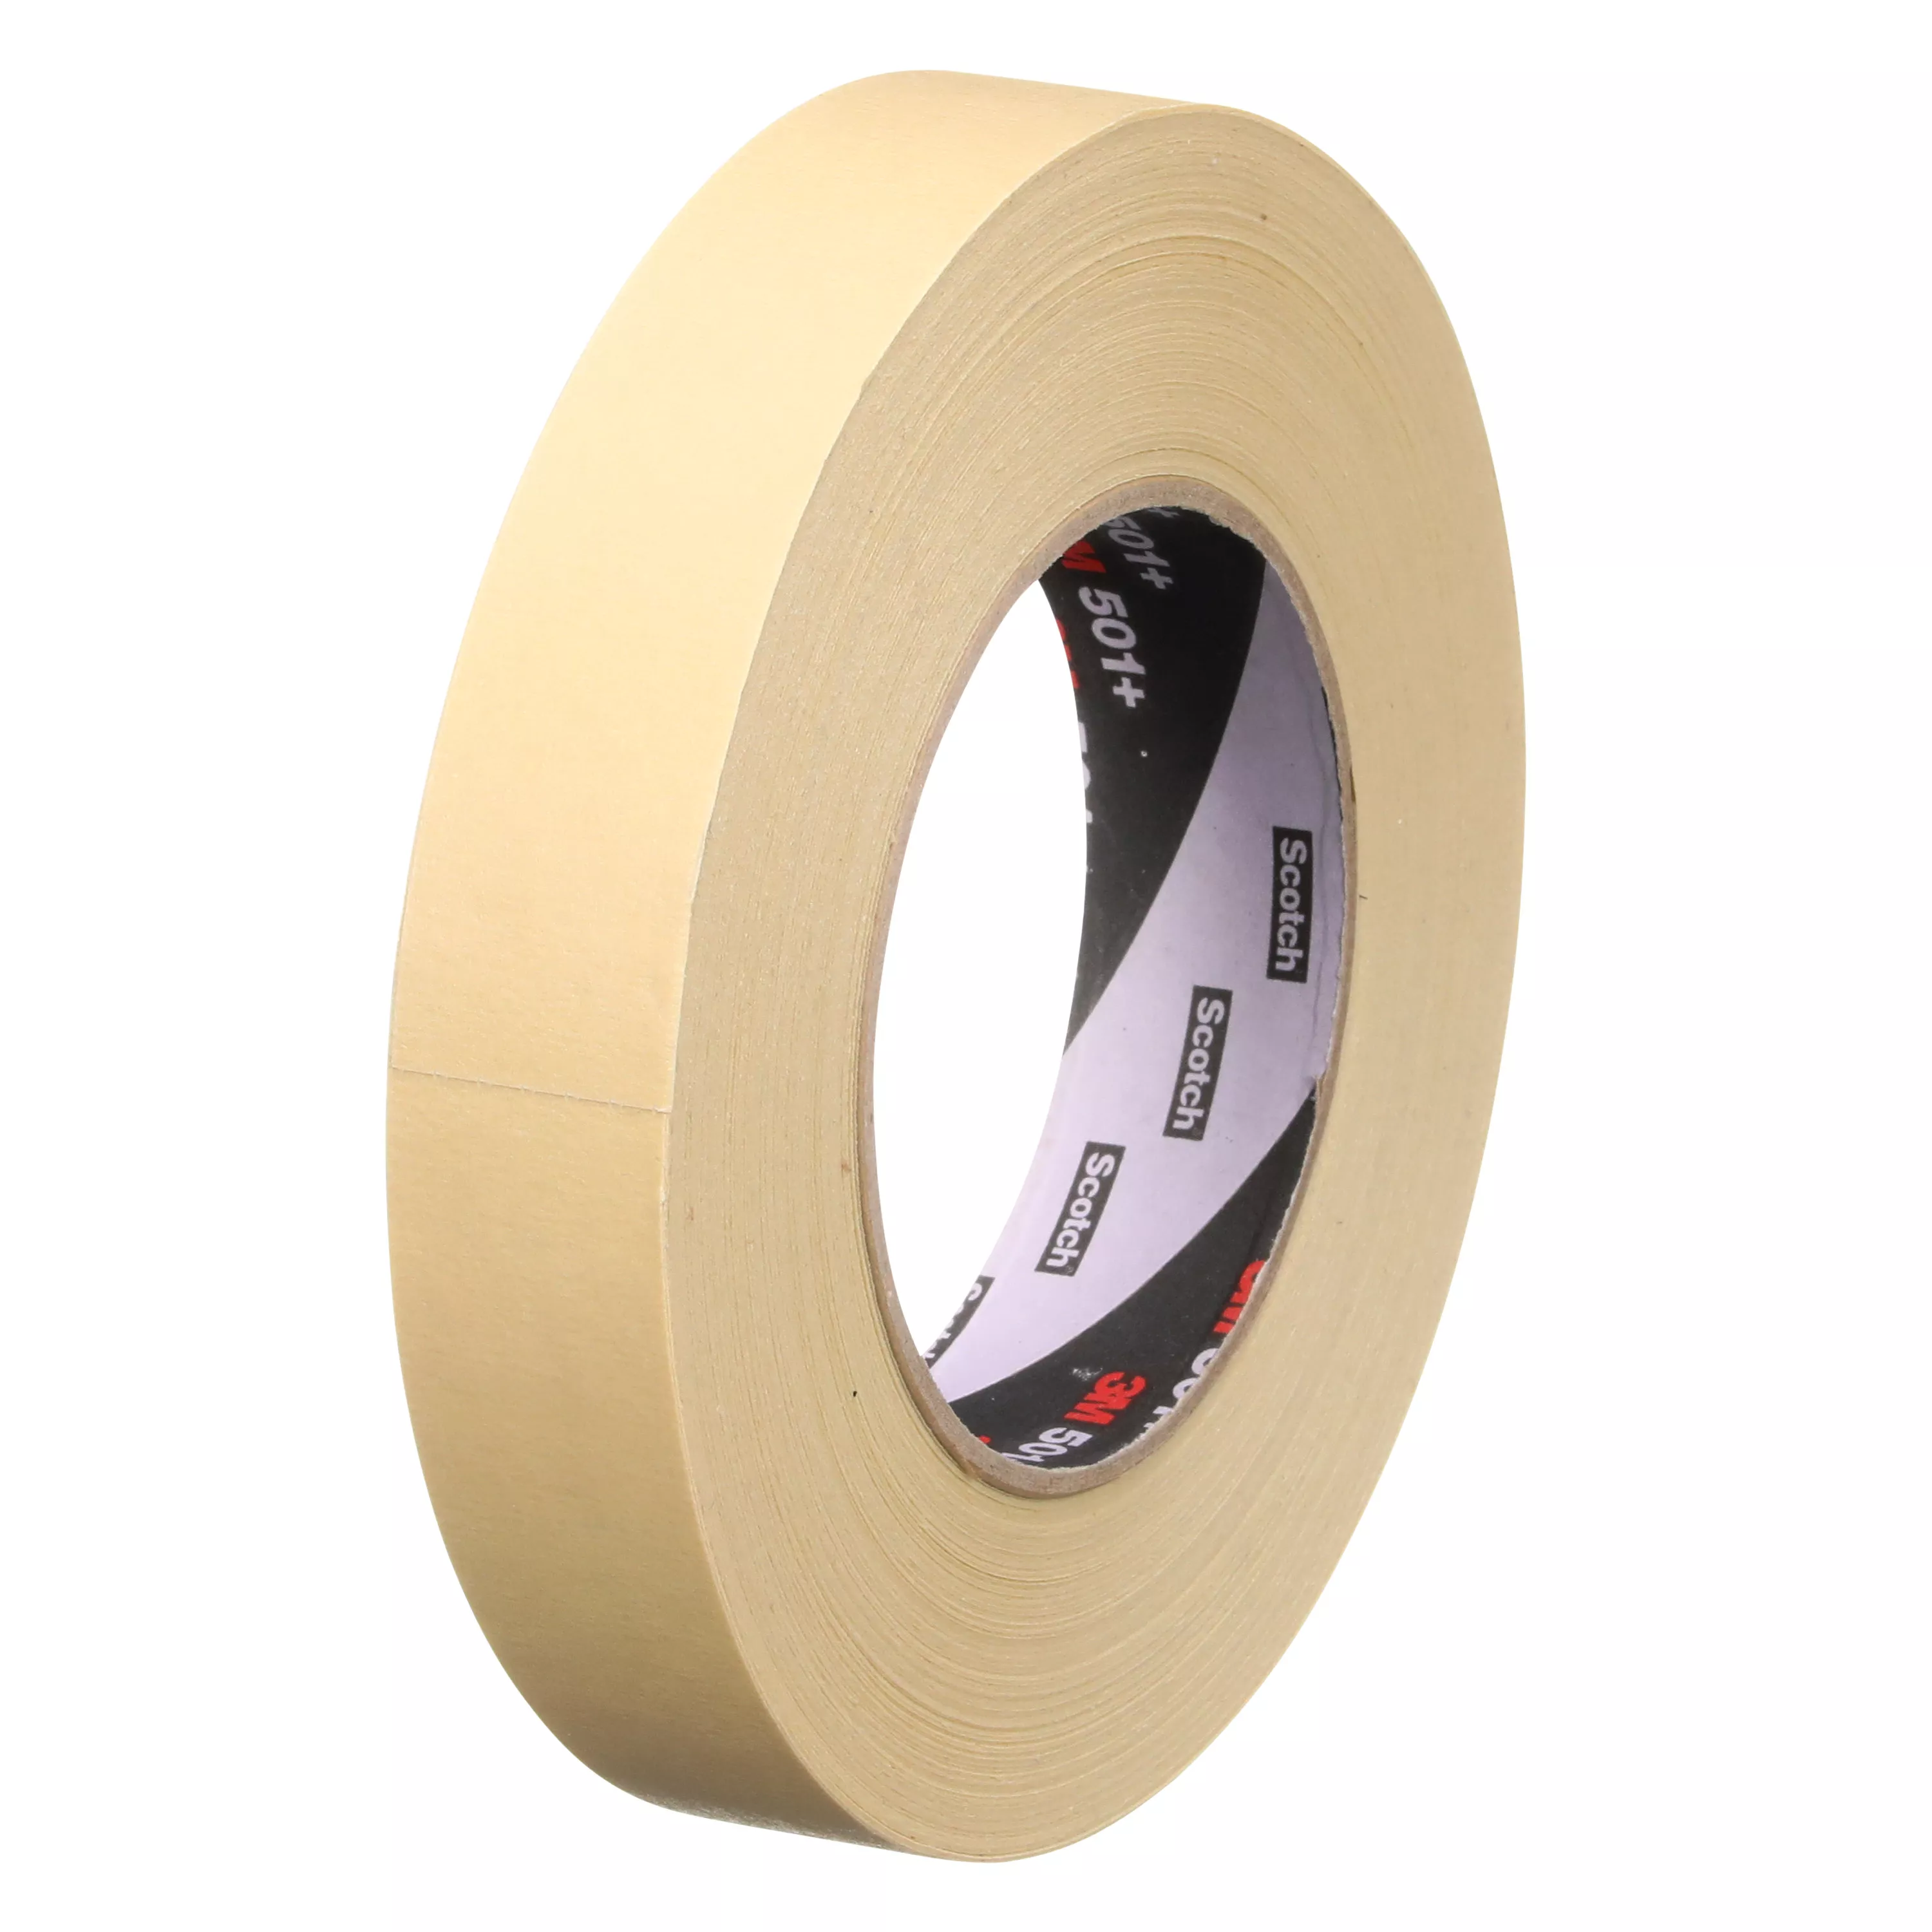 3M™ Specialty High Temperature Masking Tape 501+, Tan, 24 mm x 55 m, 7.3
mil, 36 Rolls/Case